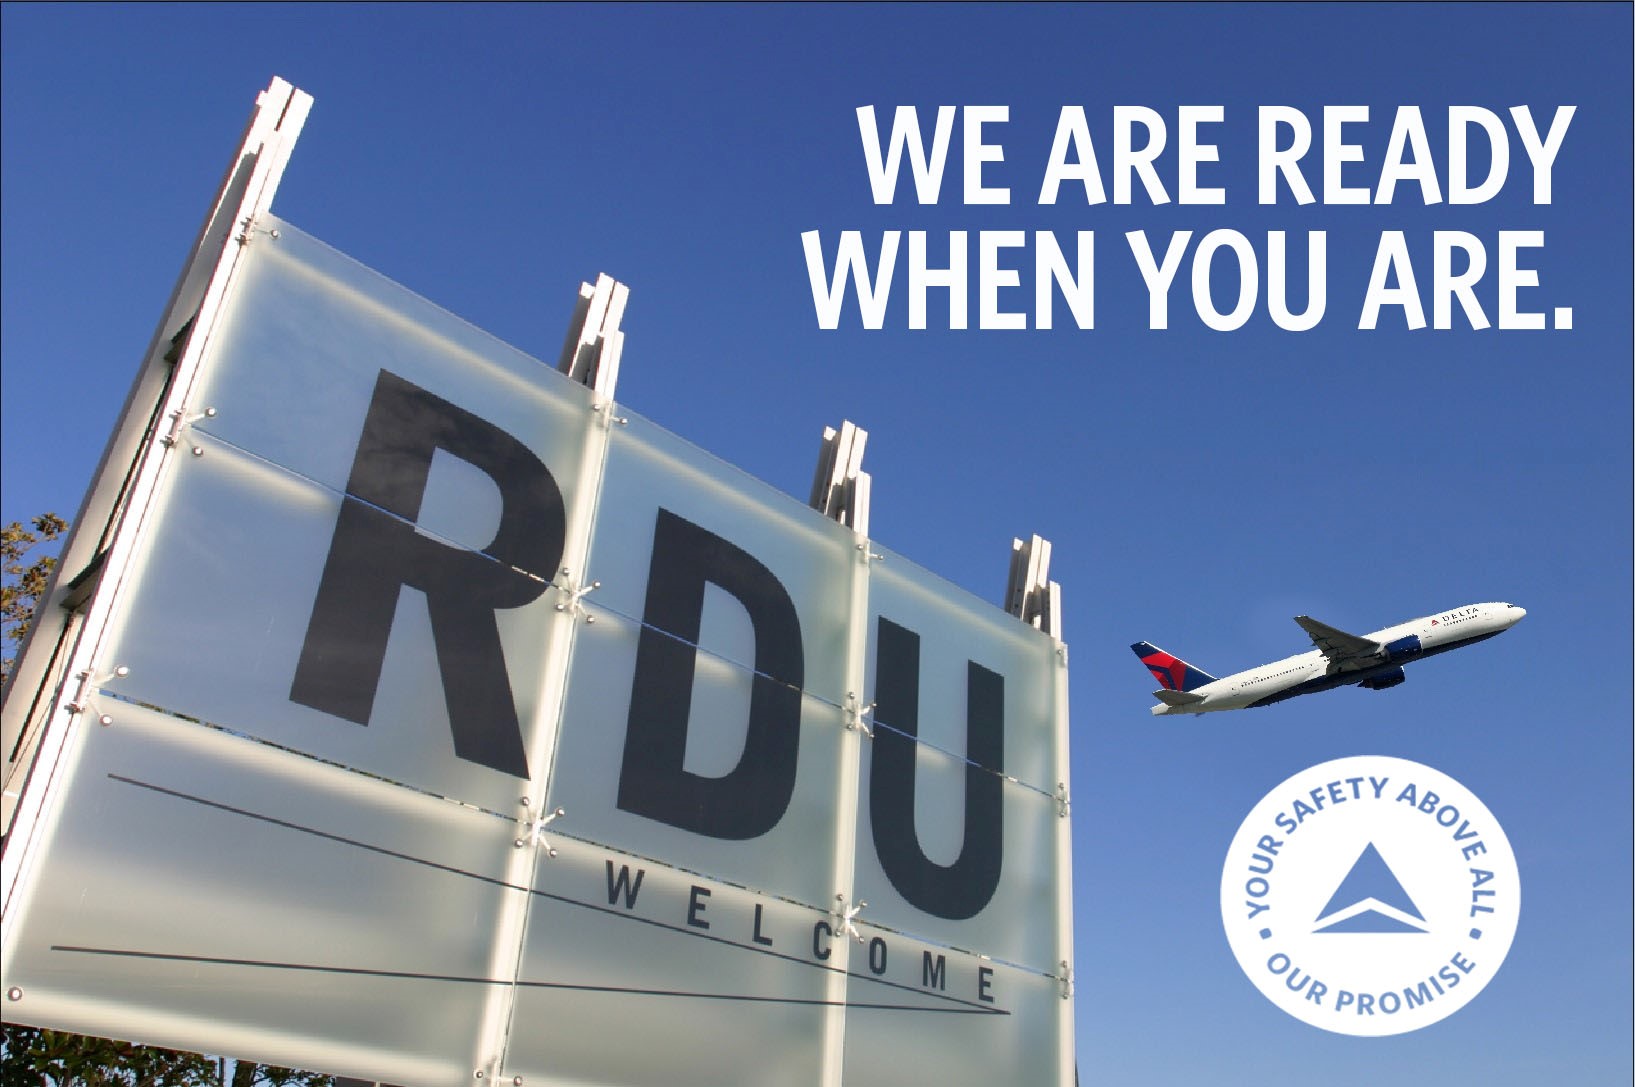 RDU and Delta